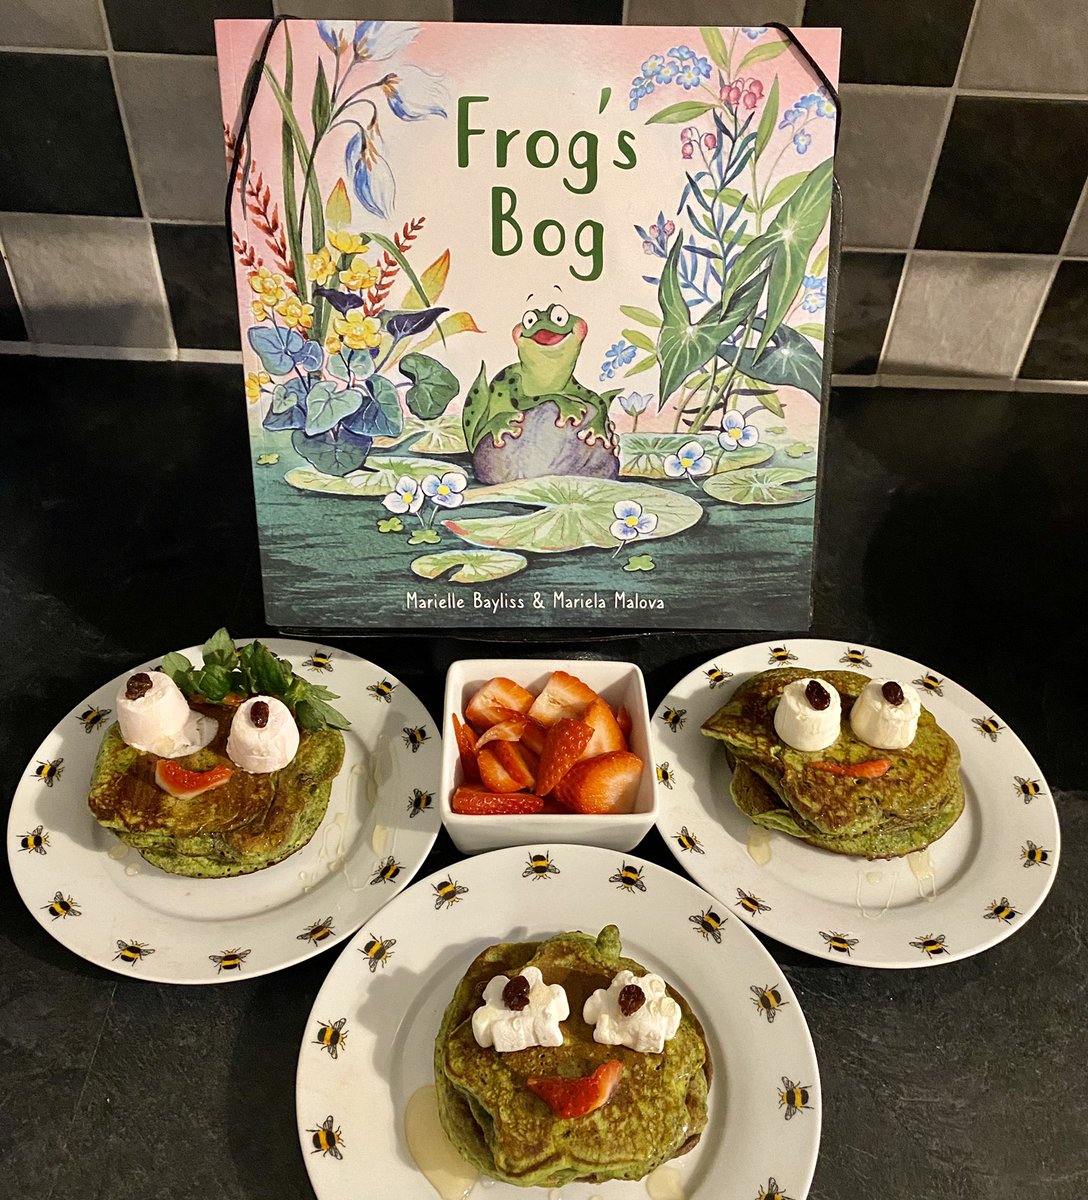 #PancakeDay and the arrival of the first sample copy of Frog's Bog = Common Frog themed pancakes! 

#pancakes #frog #spinachpancake #frogsbog #graffeg #picturebook #kidspicturebook #childrenspicturebook #funfoodforkids #cutefoodforkids  #kidlit #booklaunch